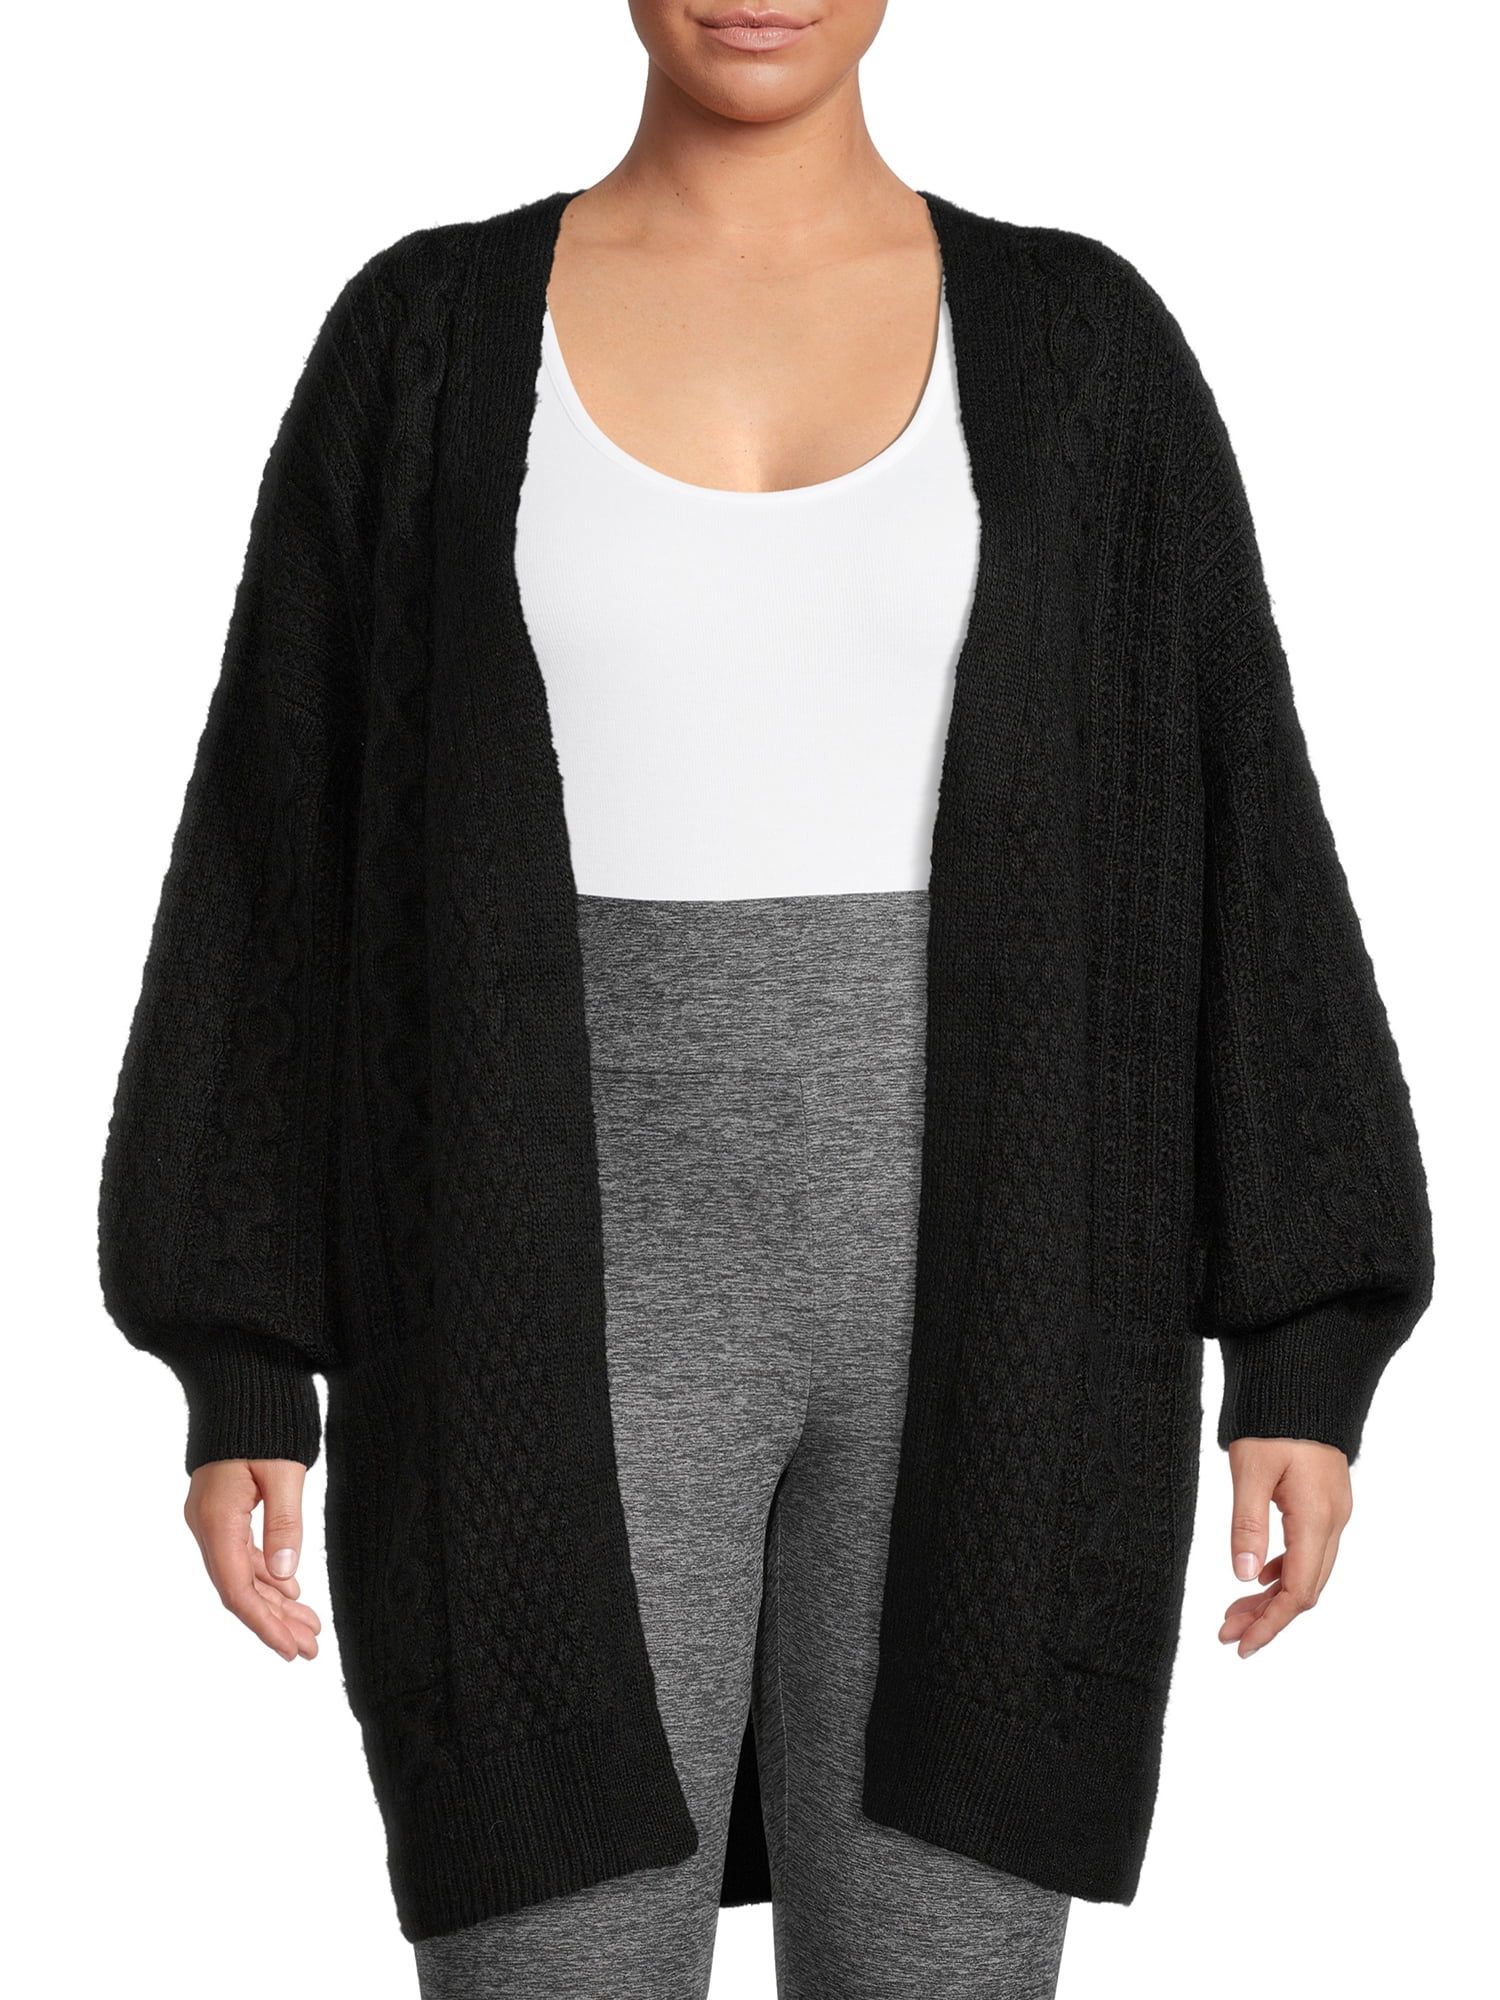 Jessica London Women's Plus Size Cable Duster Sweater Long Cardigan